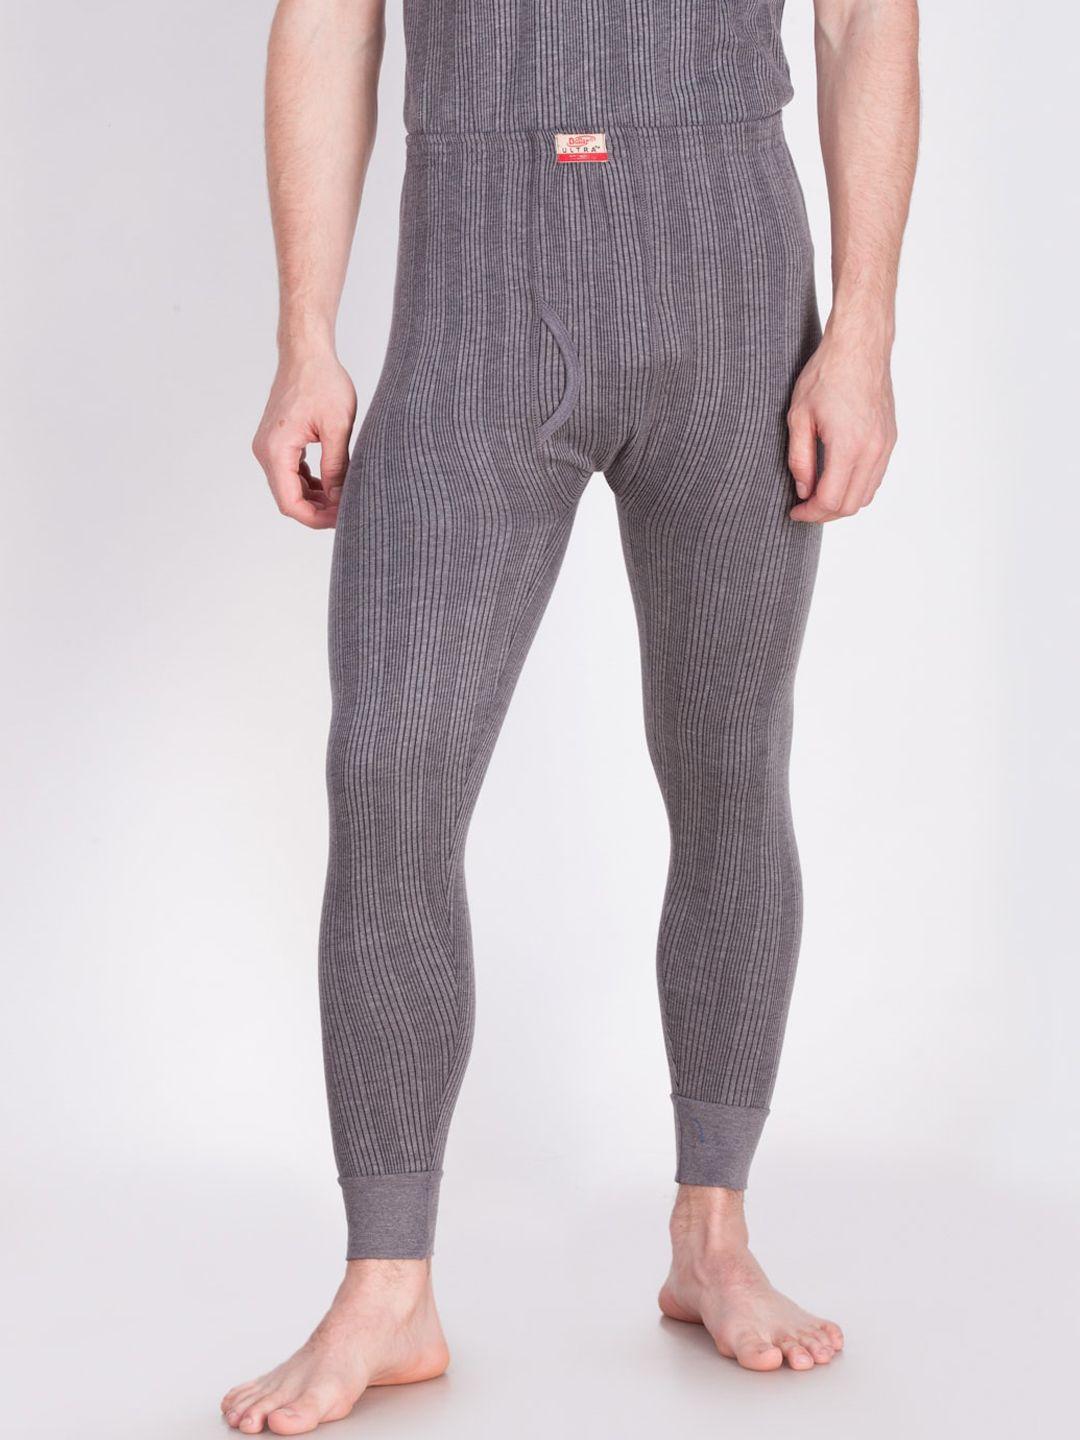 dollar ultra men charcoal-grey striped thermal bottoms